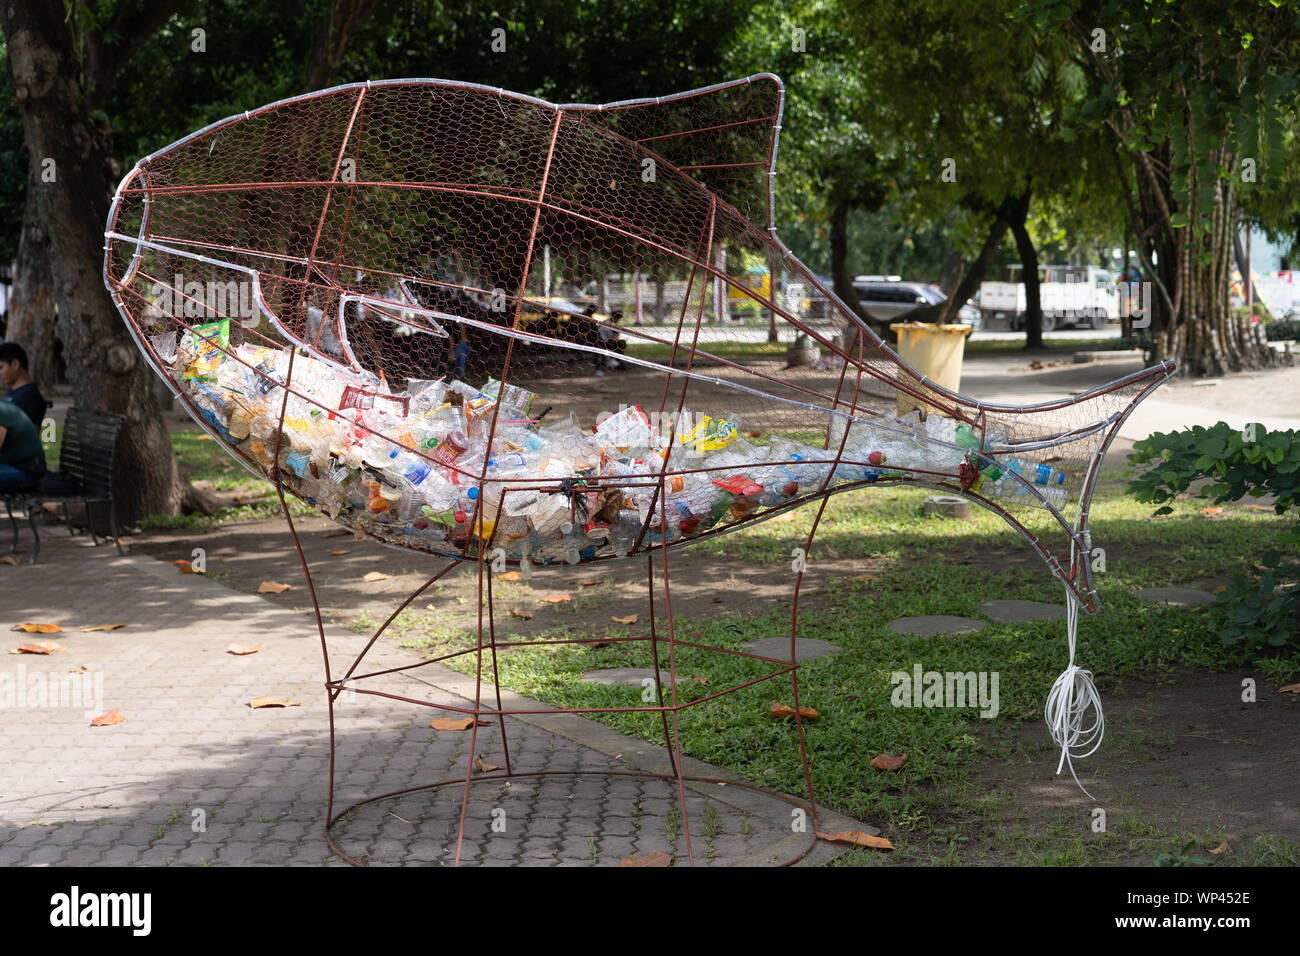 A collection point for used plastic bottles in the form of a metal meshed fish.located in a park within General Santos City,Philippines. Stock Photo